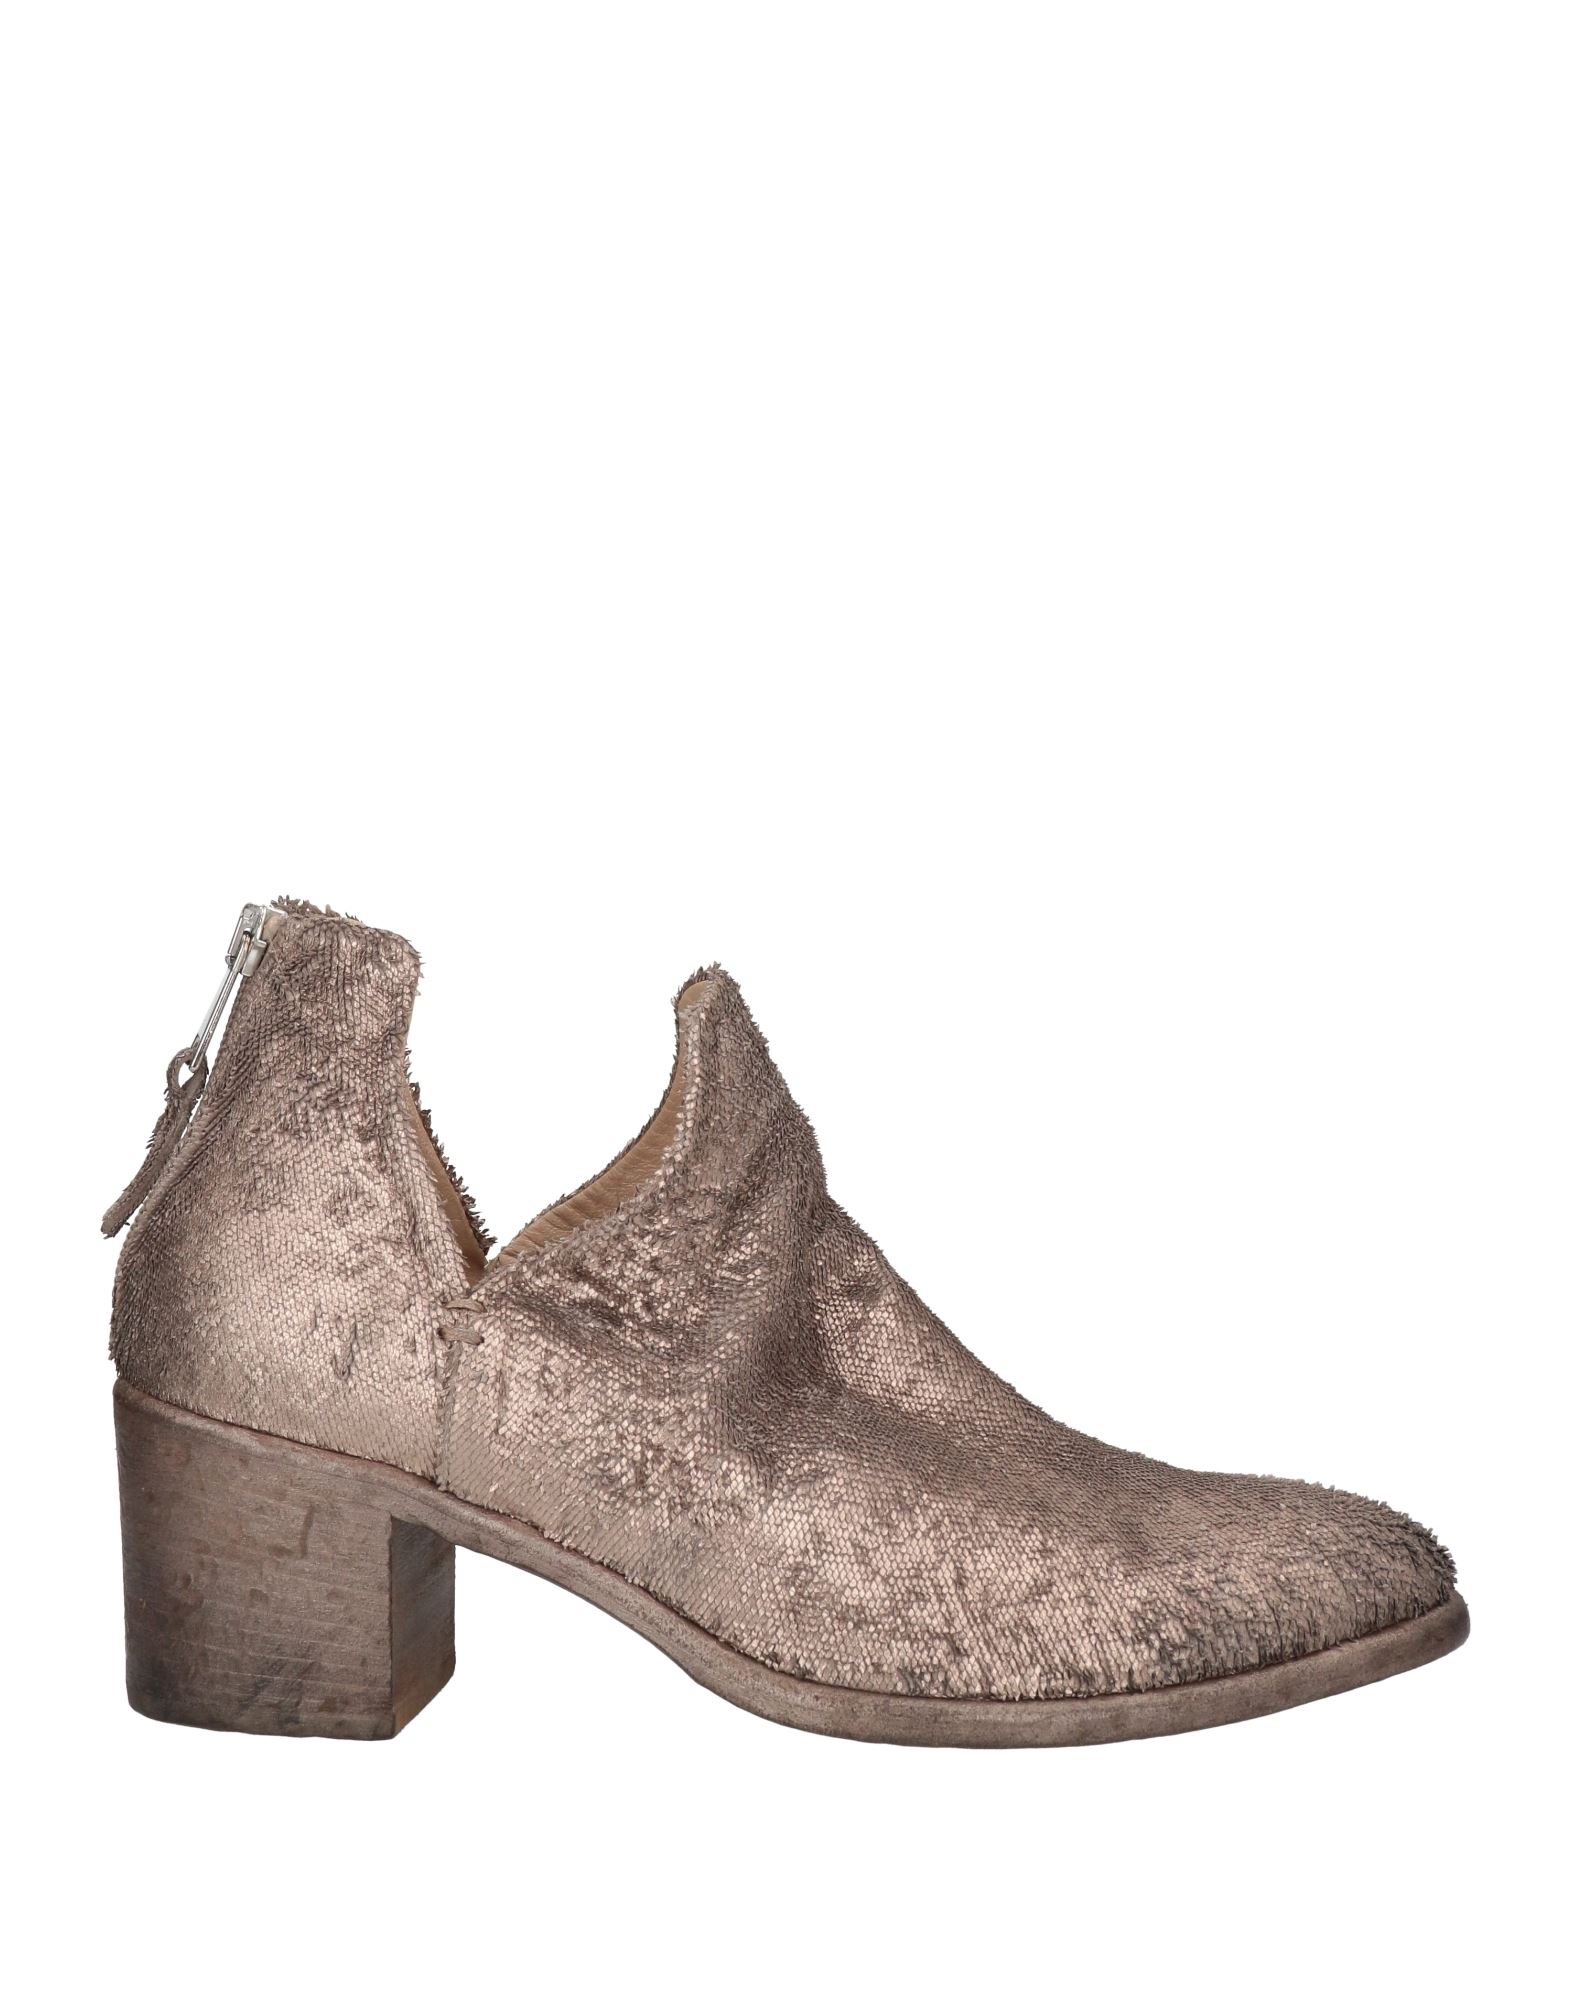 Strategia Ankle Boots In Grey